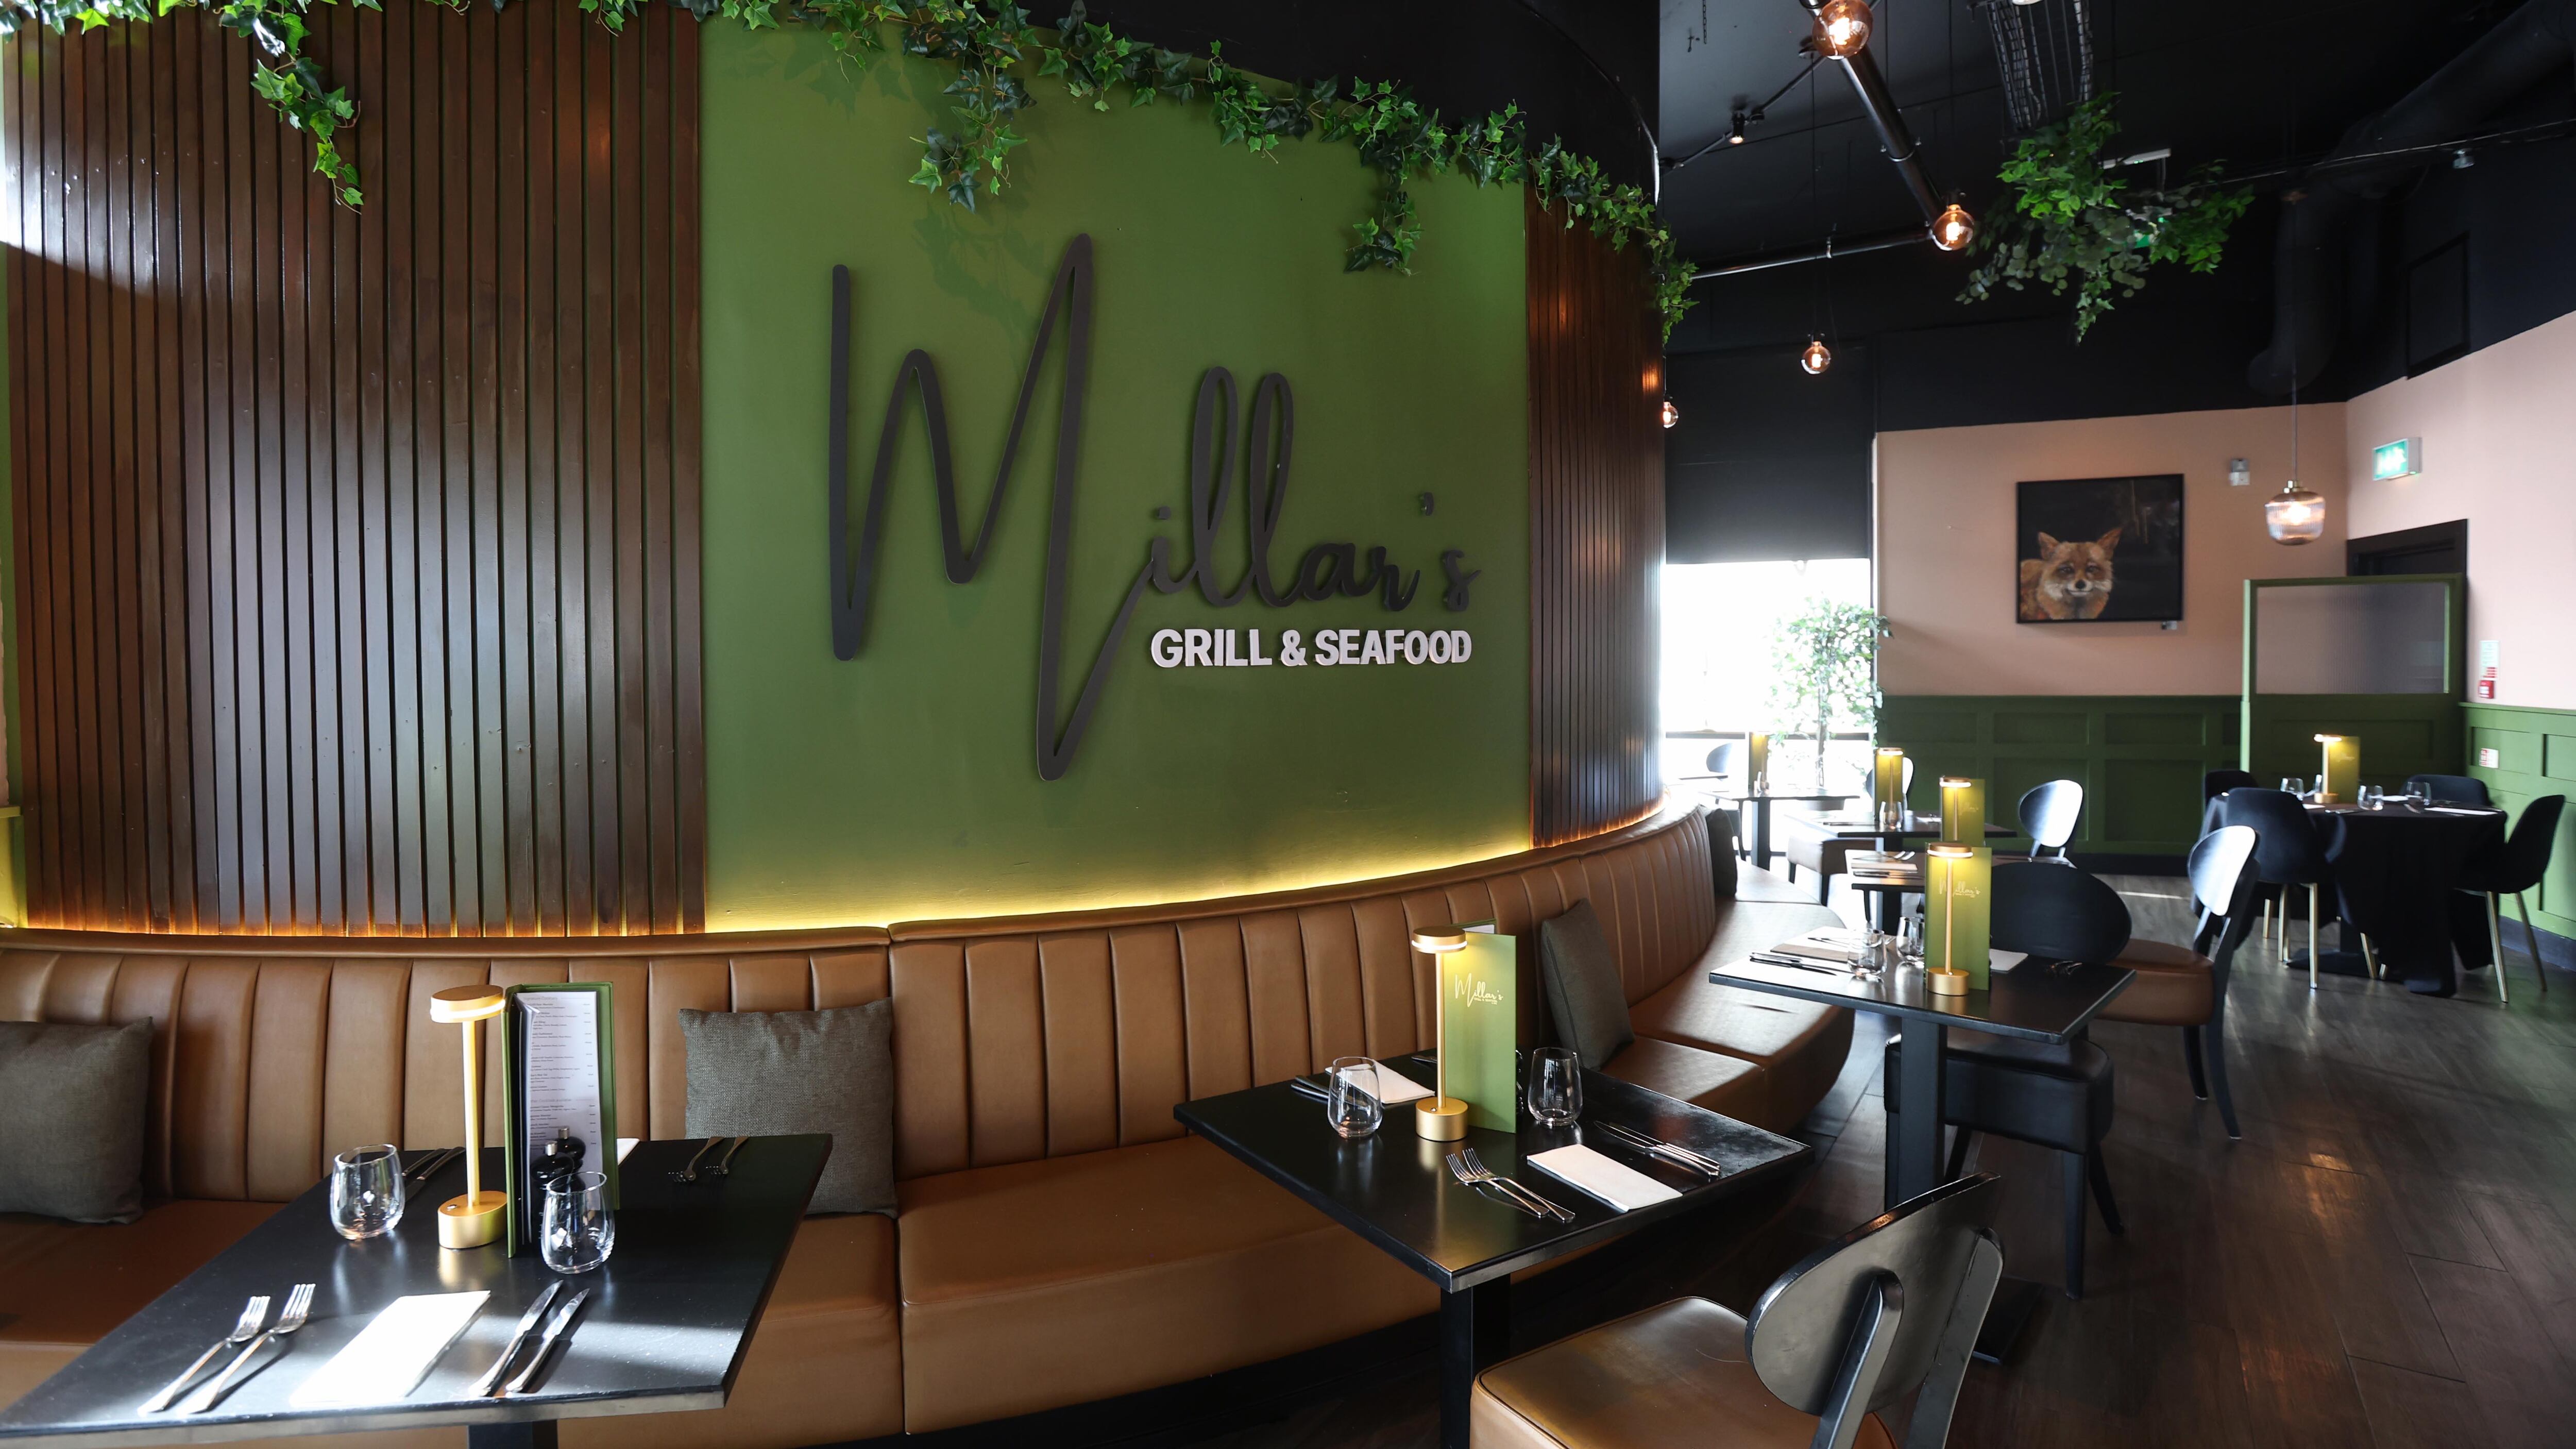 Millar’s Grill and Seafood at Lanyon Quay  in Belfast.
PICTURE COLM LENAGHAN